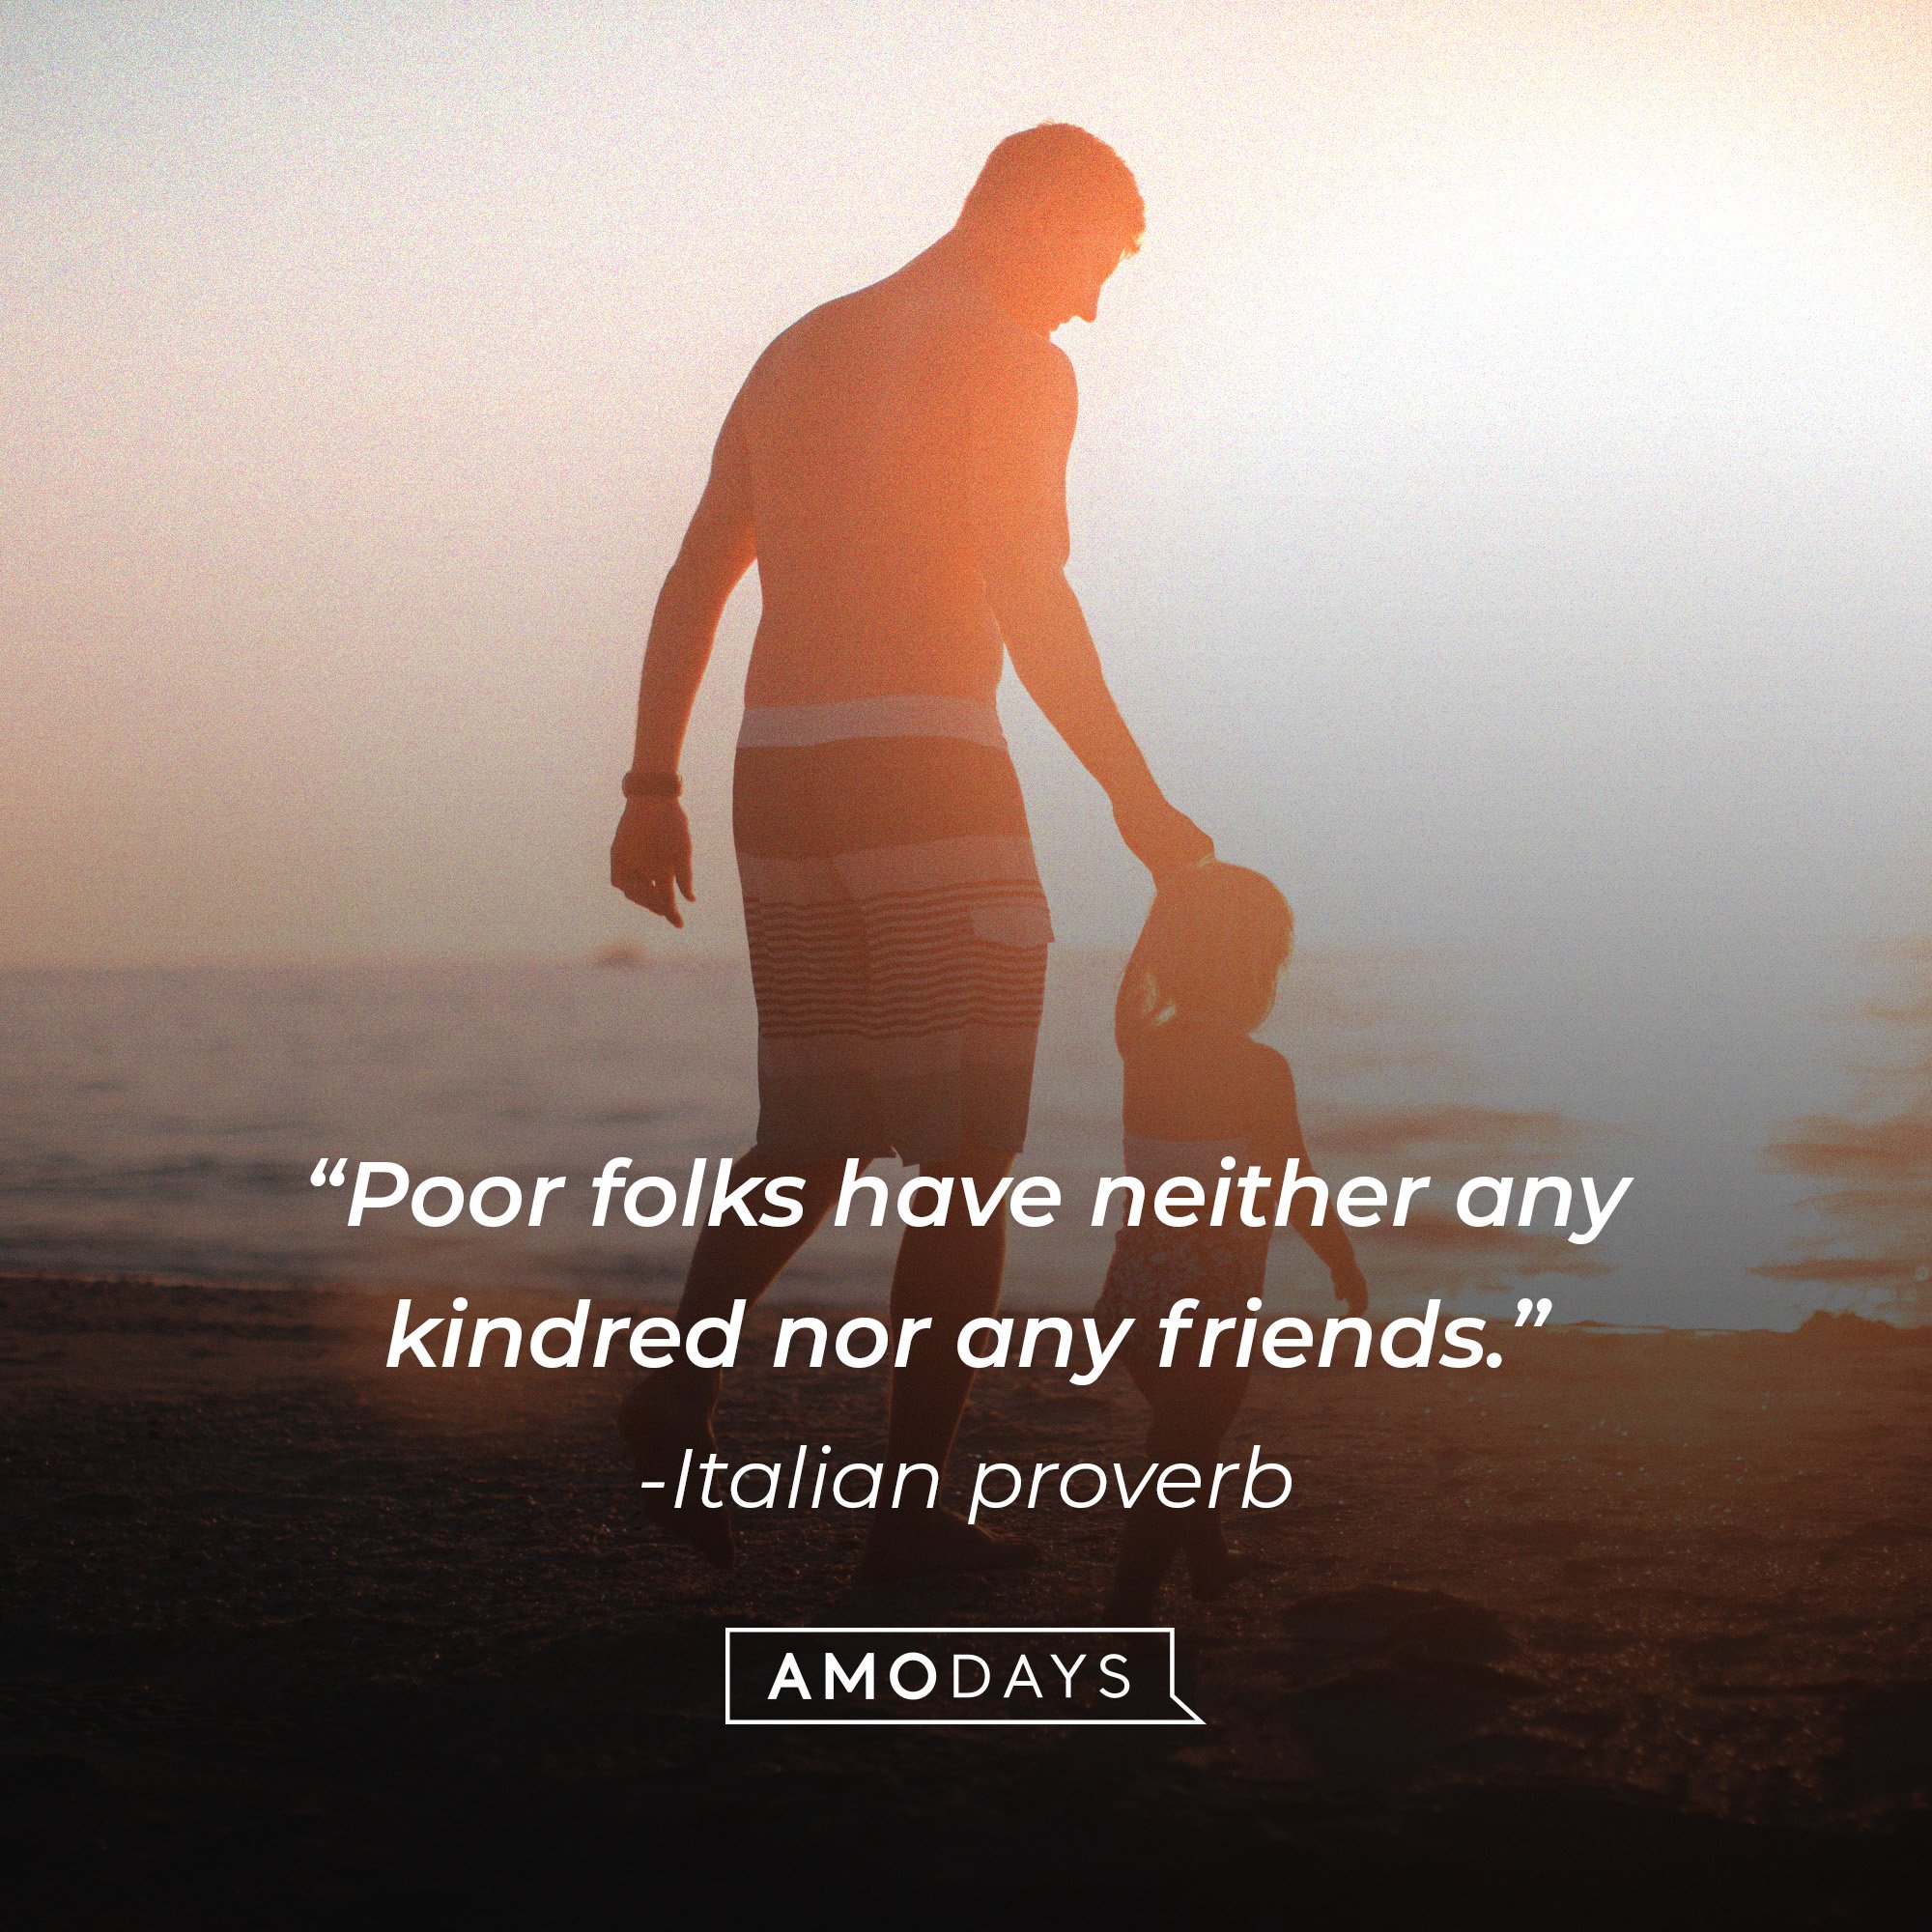 Italian proverb: “Poor folks have neither any kindred nor any friends.” | Image: AmoDays